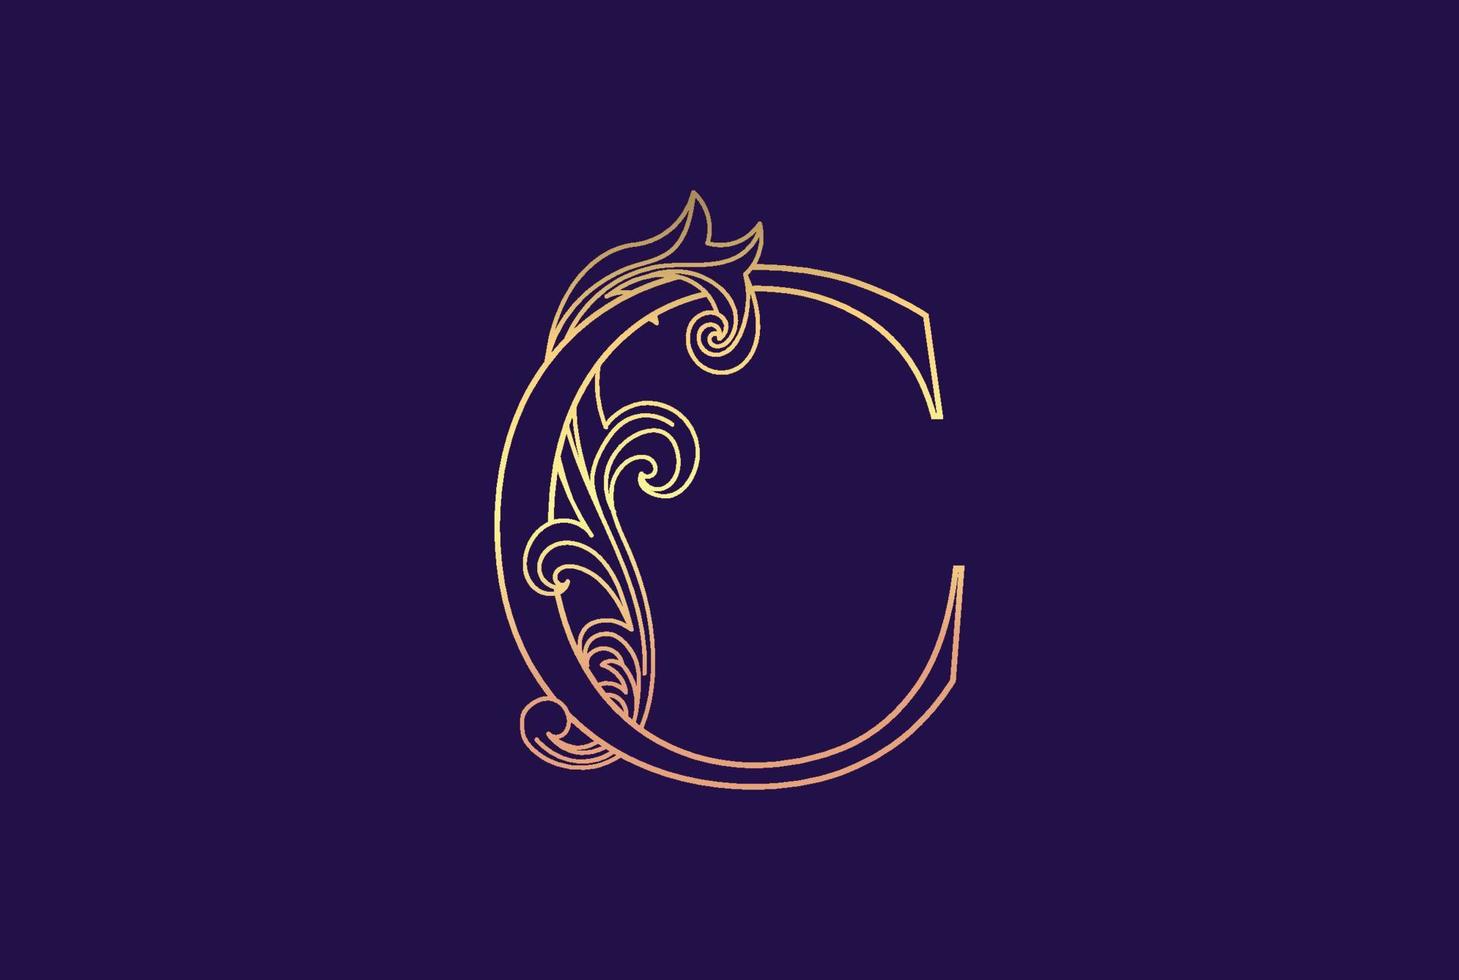 Golden Elegant Luxury Initial Letter C with Swirl Floral Ornament Logo and Dark Violet Background vector